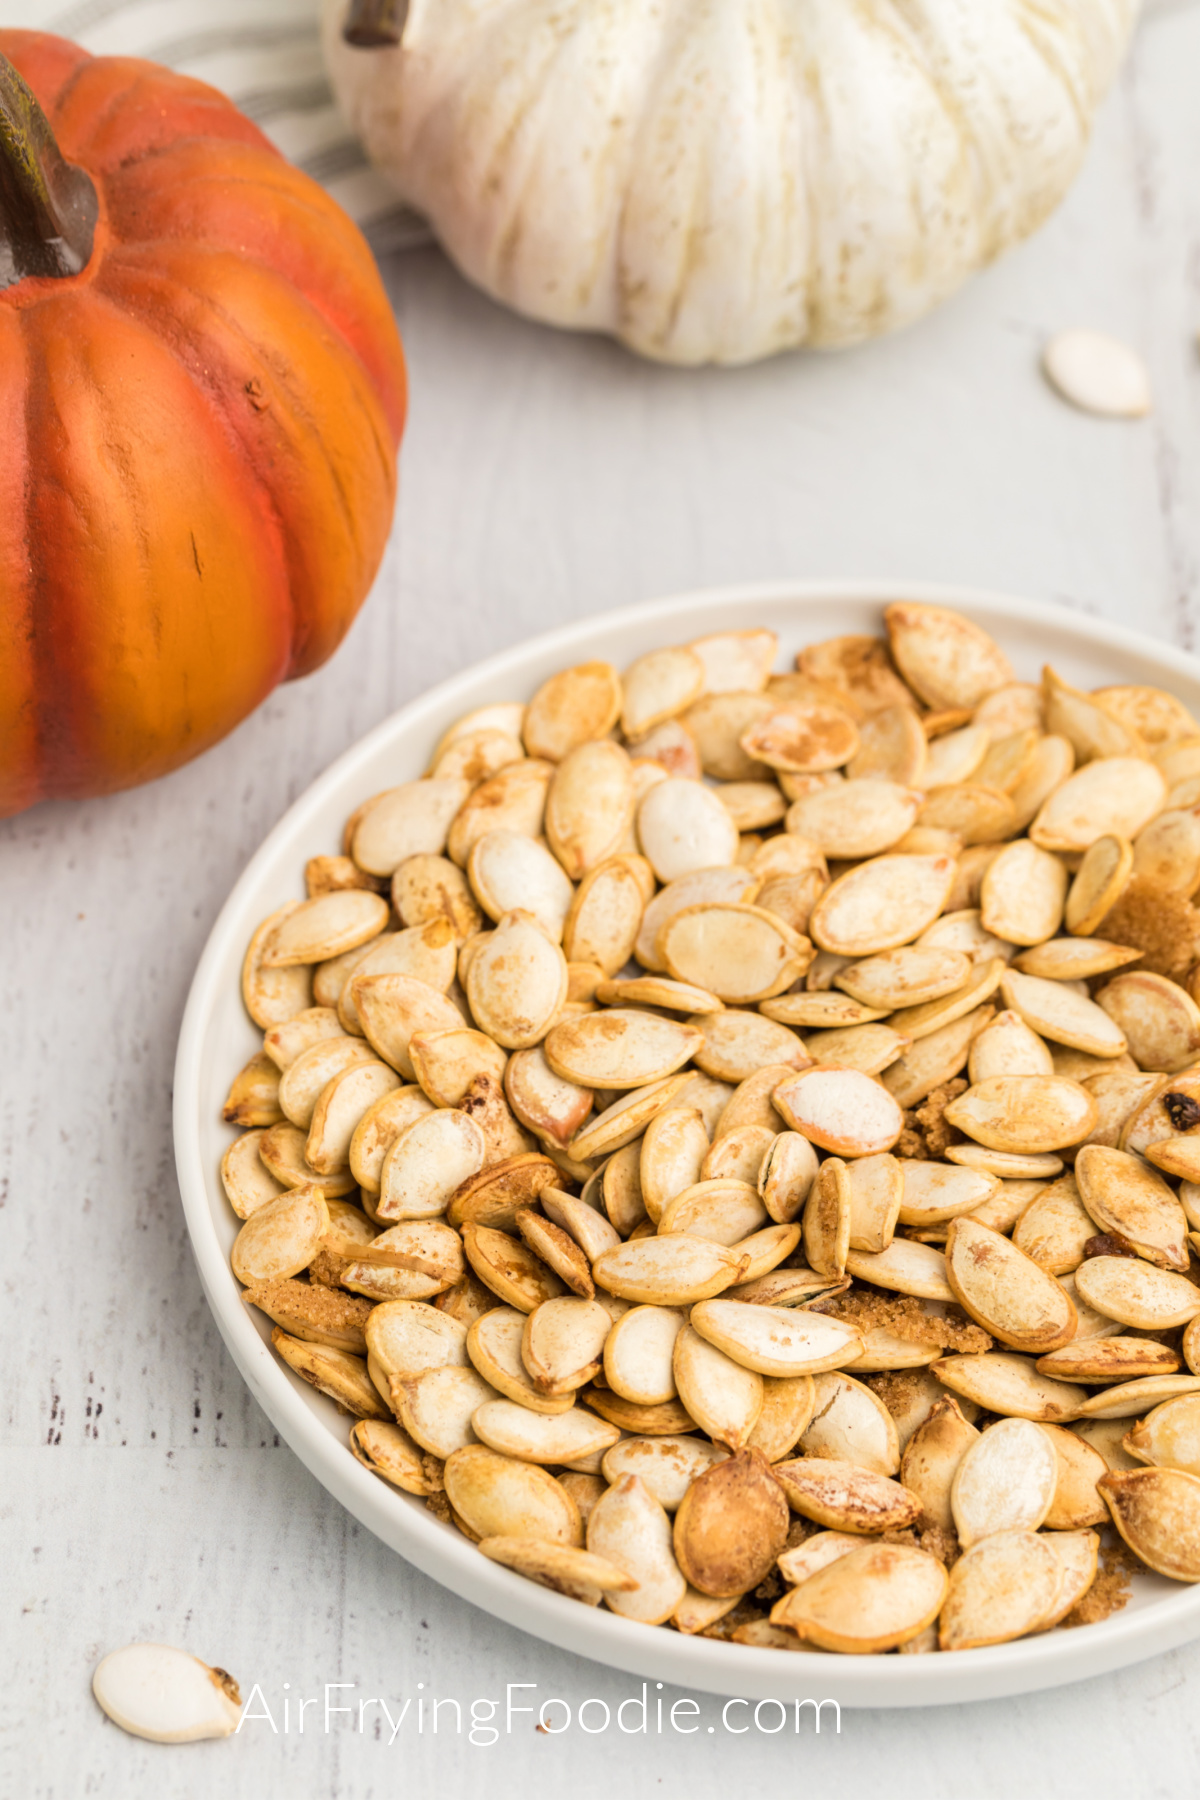 Pumpkin seeds made in the air fryer and served on a white plate with pumpkins surrounding them.